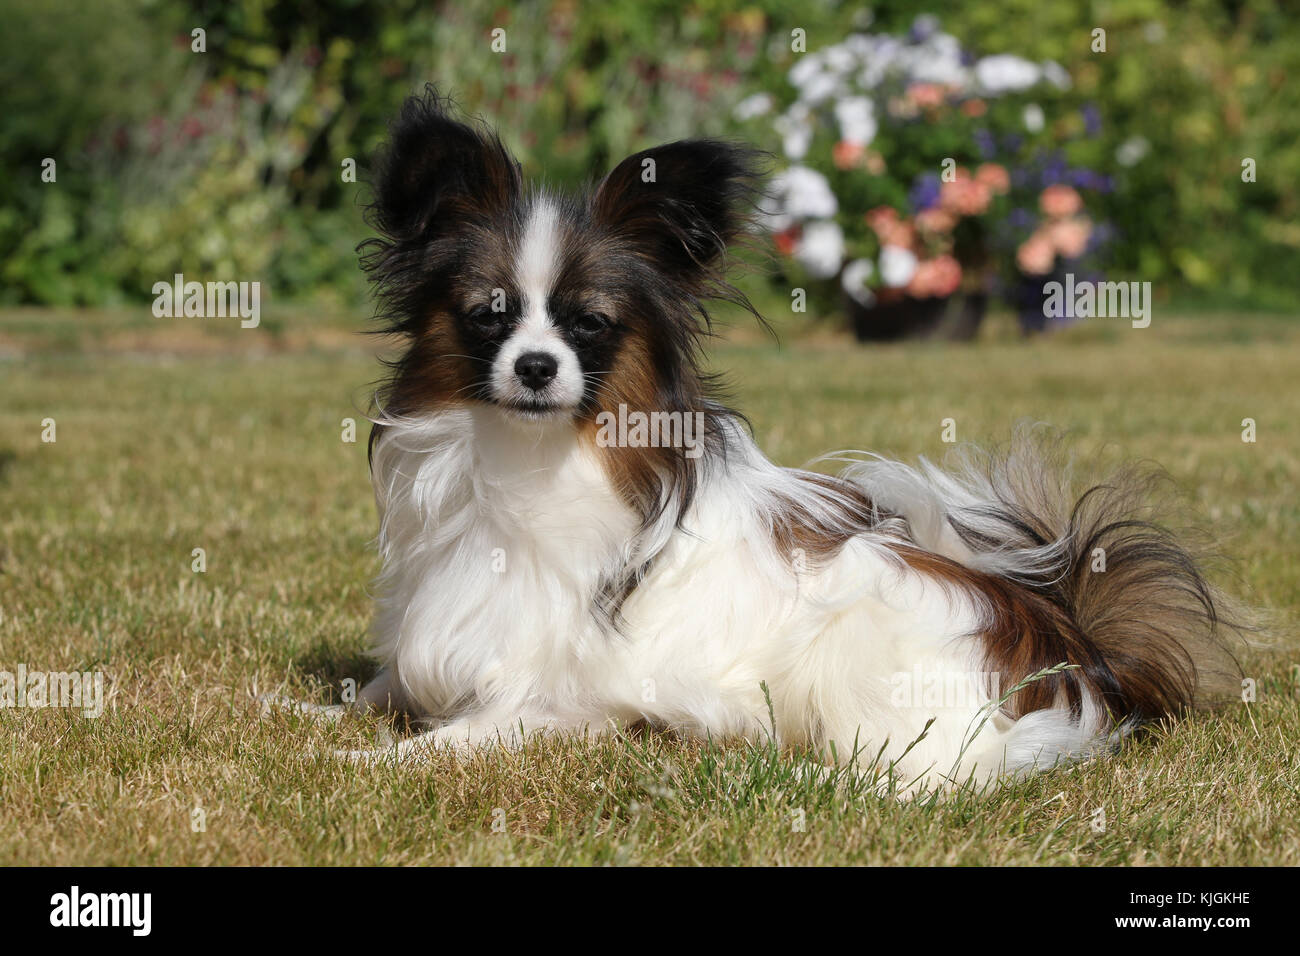 Papillon Continental Toy Spaniel Papillon Continental Toy Spaniel dog lying down on grass lawn looking alert at camera with flowers behind Stock Photo